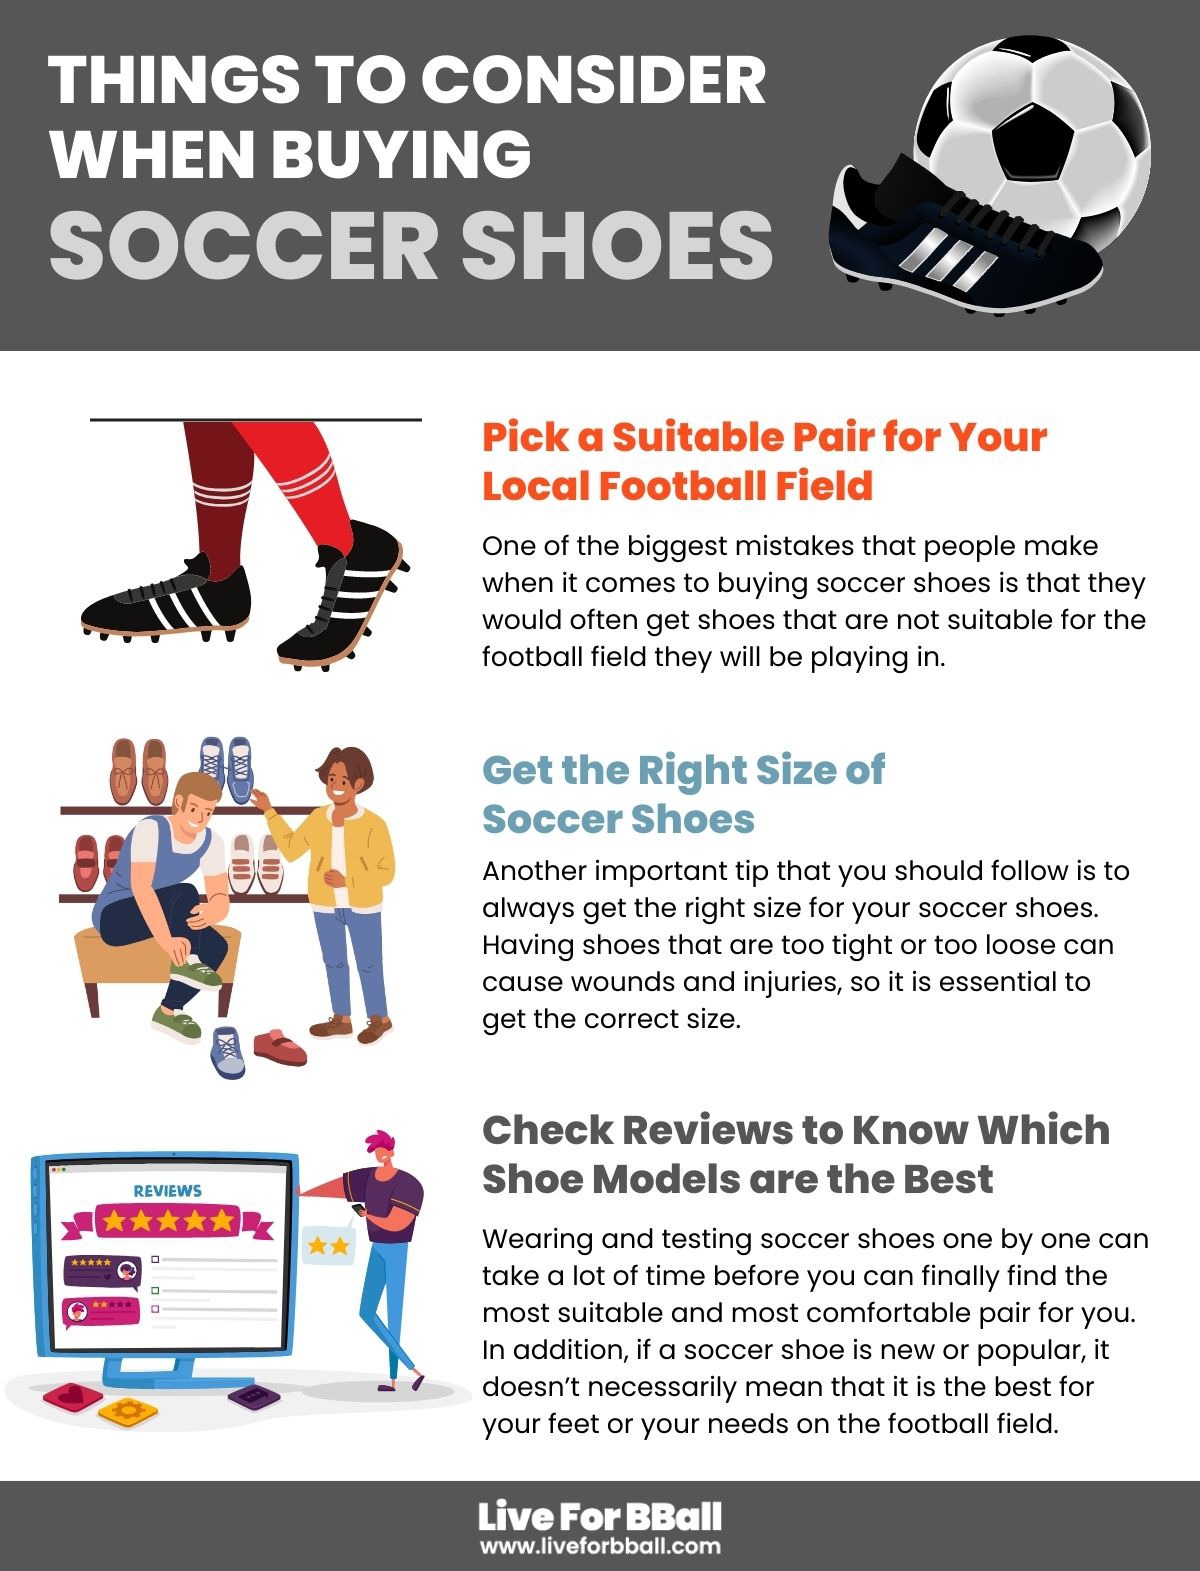 Invest in a Good Pair of Soccer Shoes